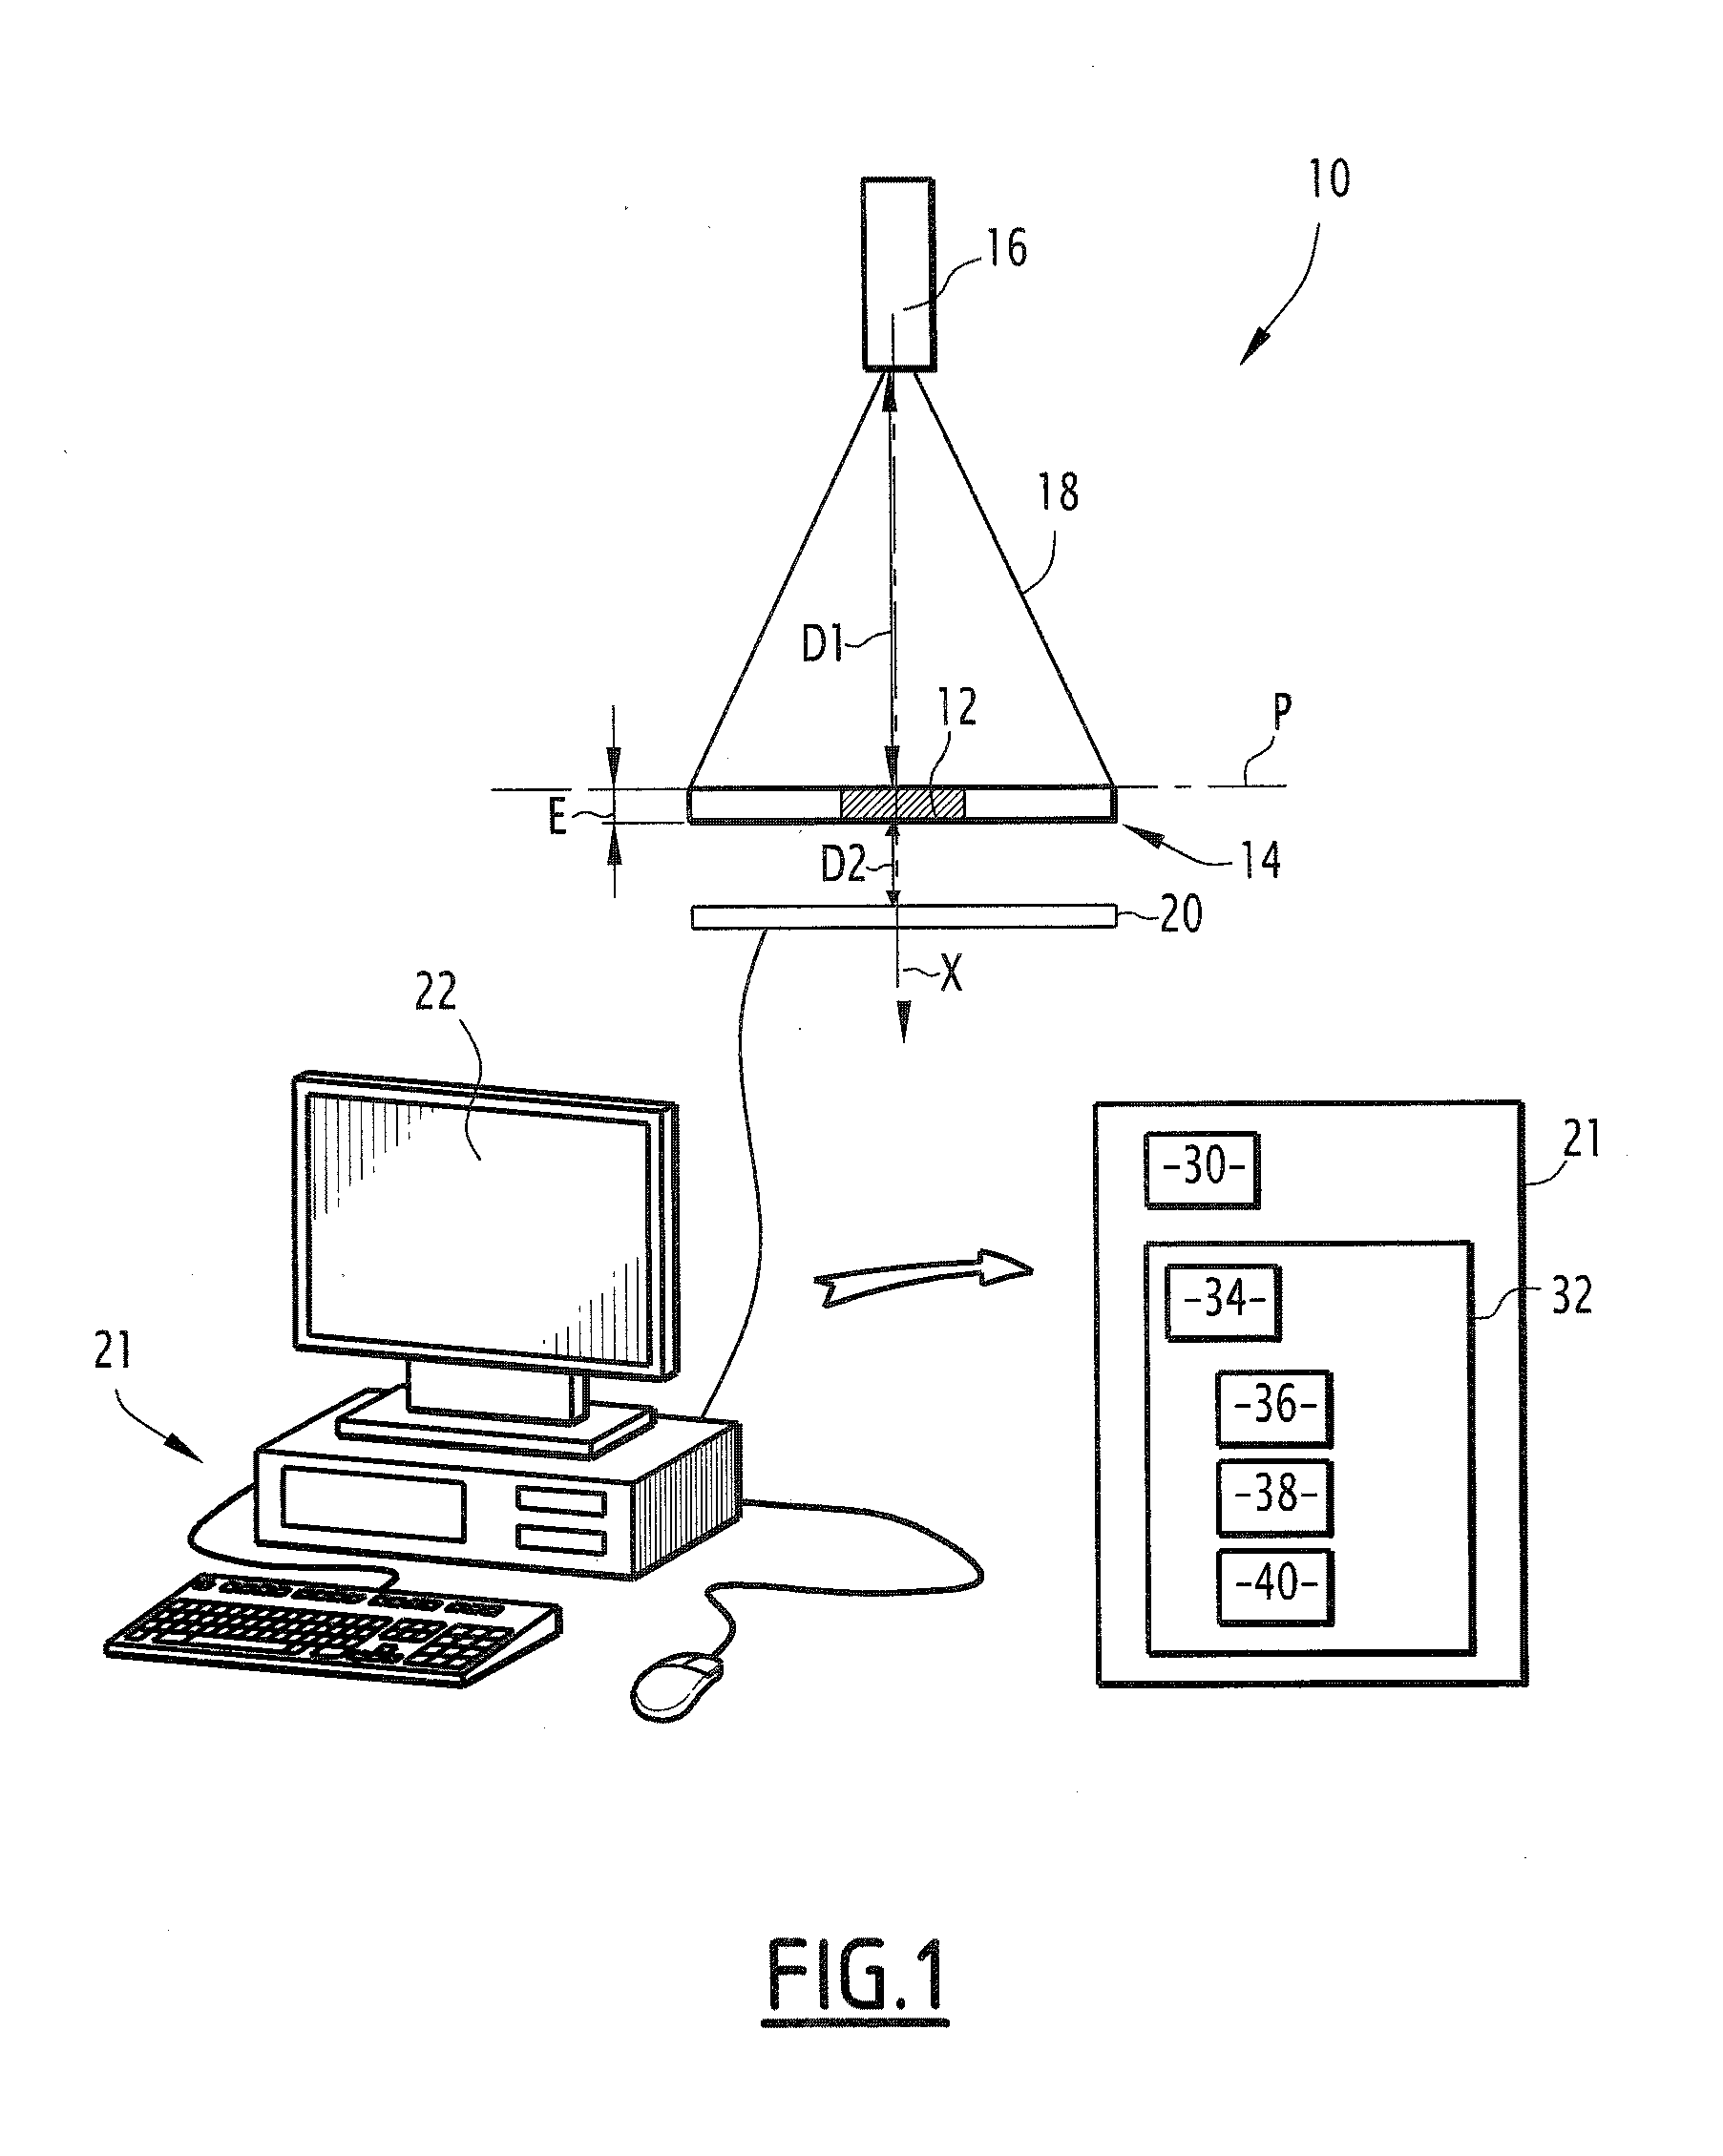 Method and system for characterizing the agglomeration or speed of particles contained in a liquid, such as blood particles